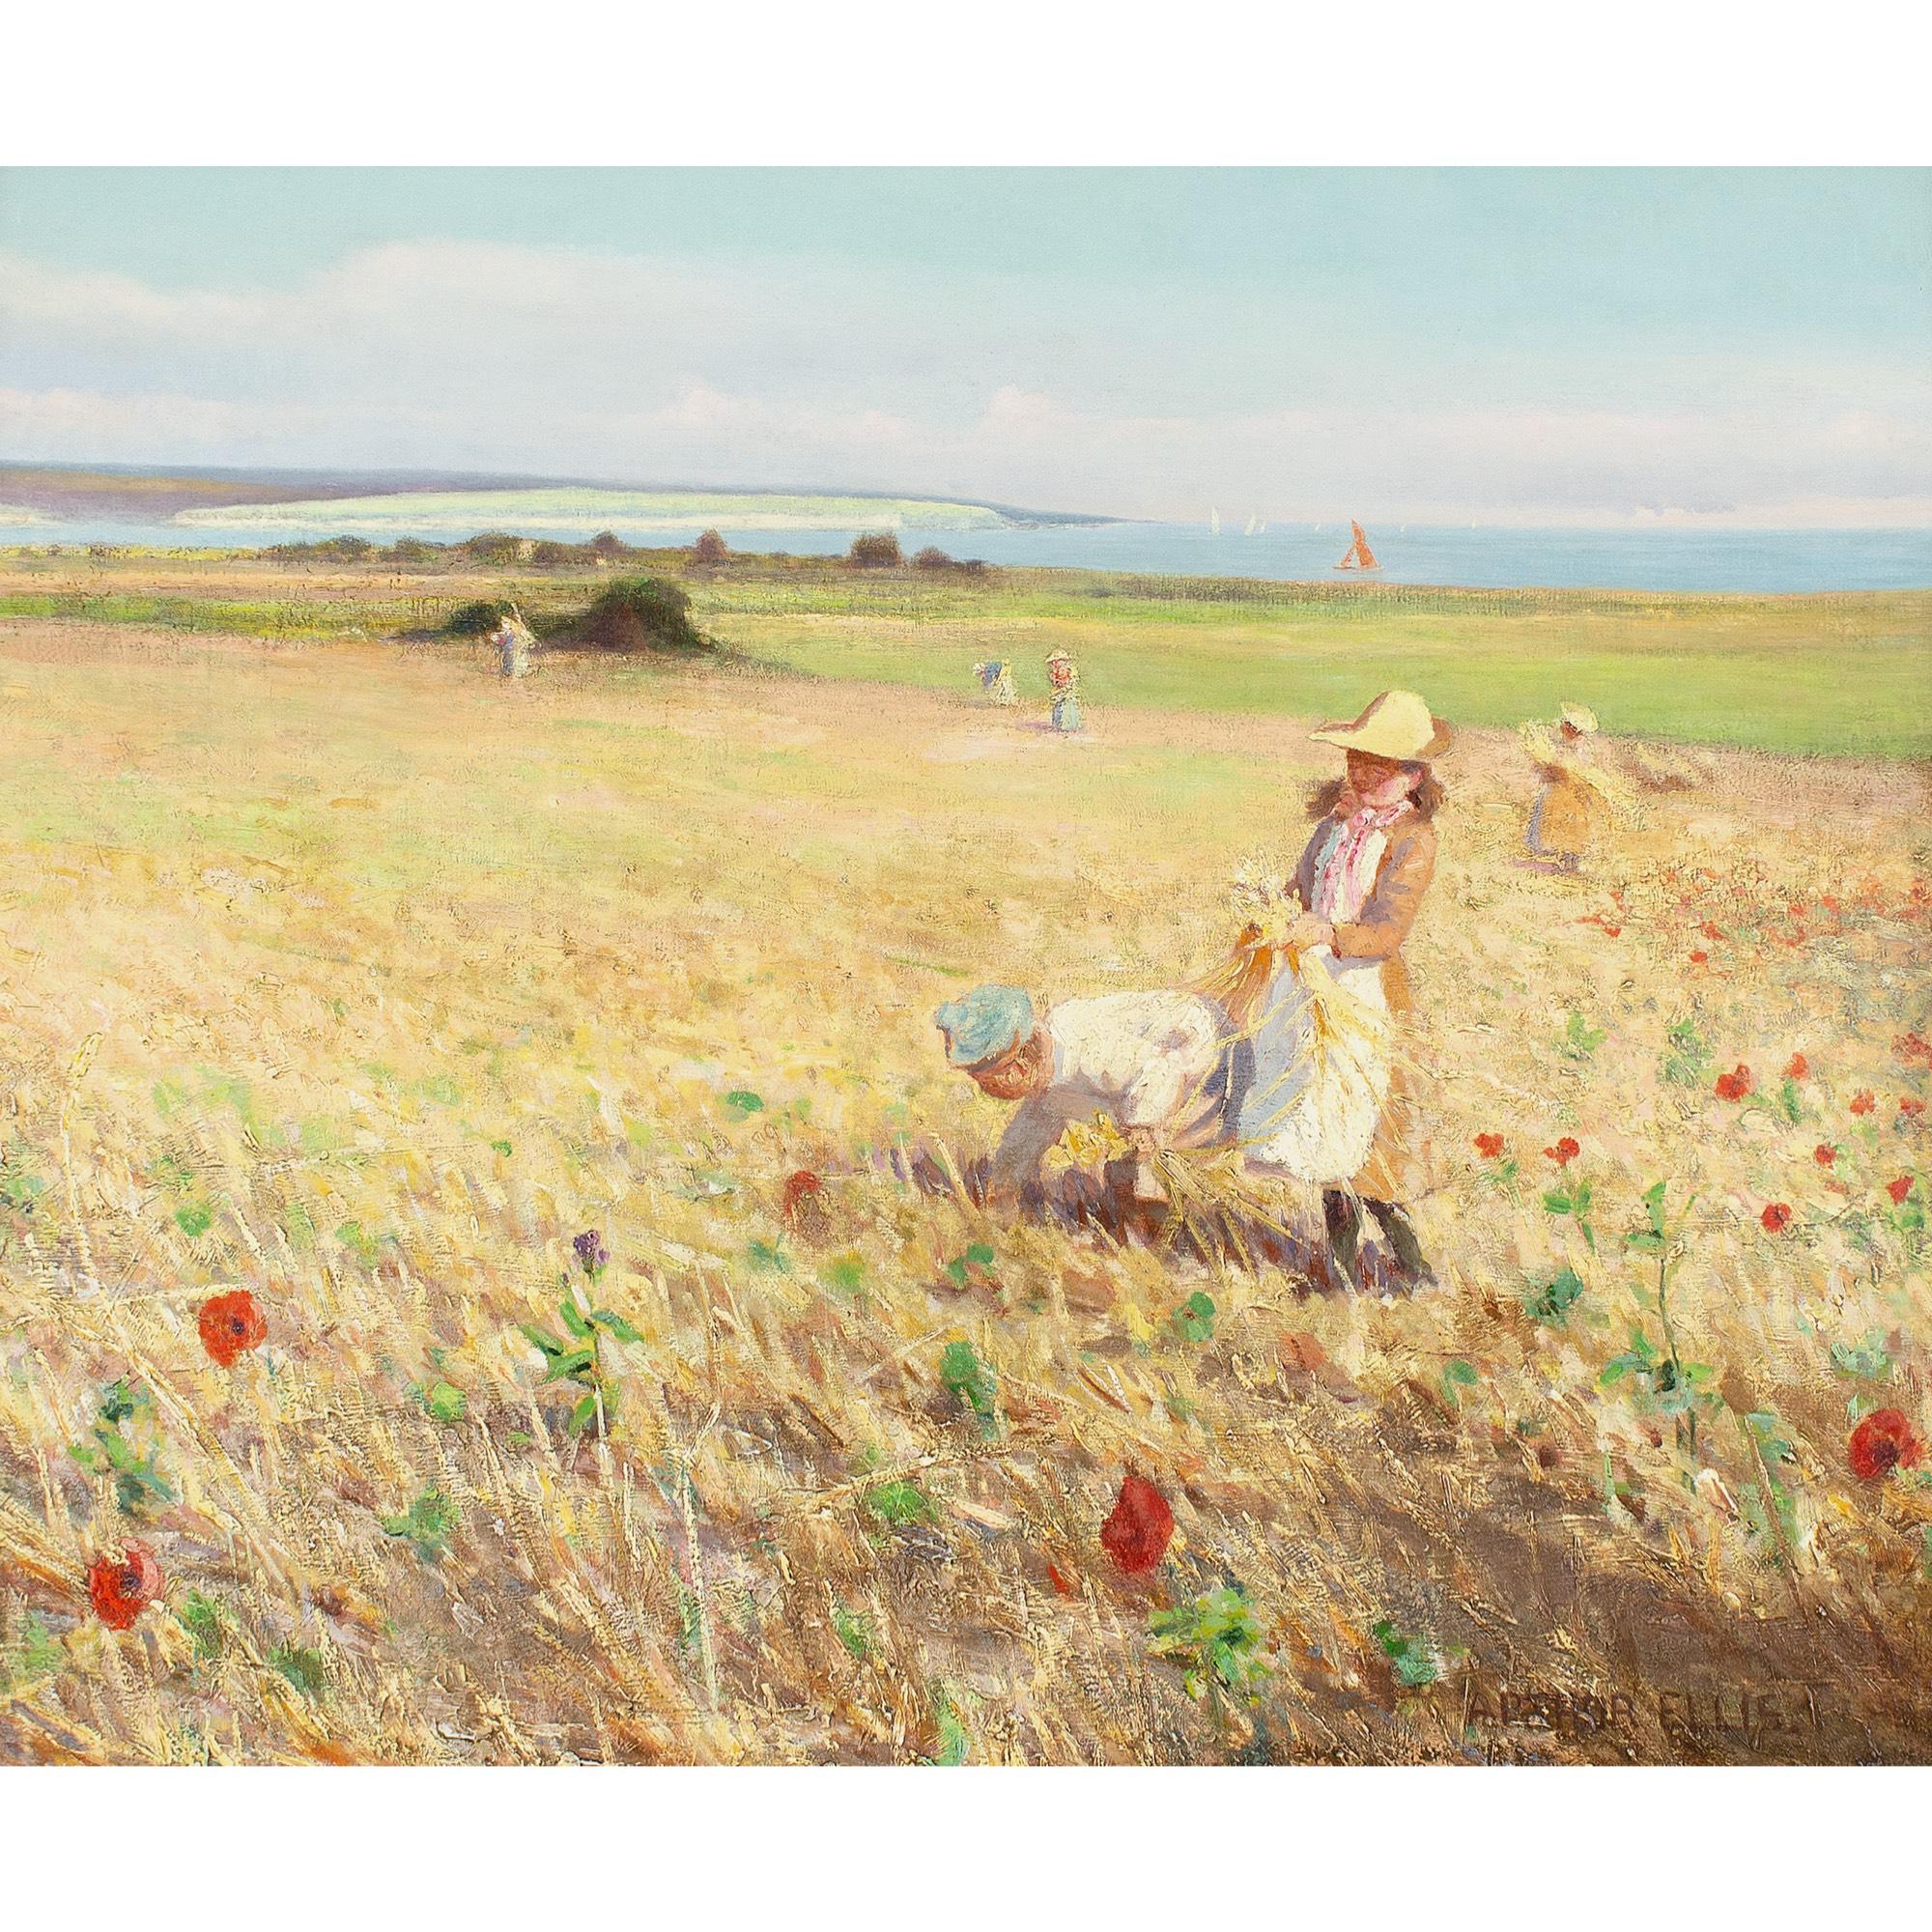 This beautiful early 20th-century oil painting by British artist Arthur Ellis (1856-1918) depicts children in a cornfield before a distant view of the sea.

Ellis was first and foremost a fine draughtsman, studying both at the Royal Academy in